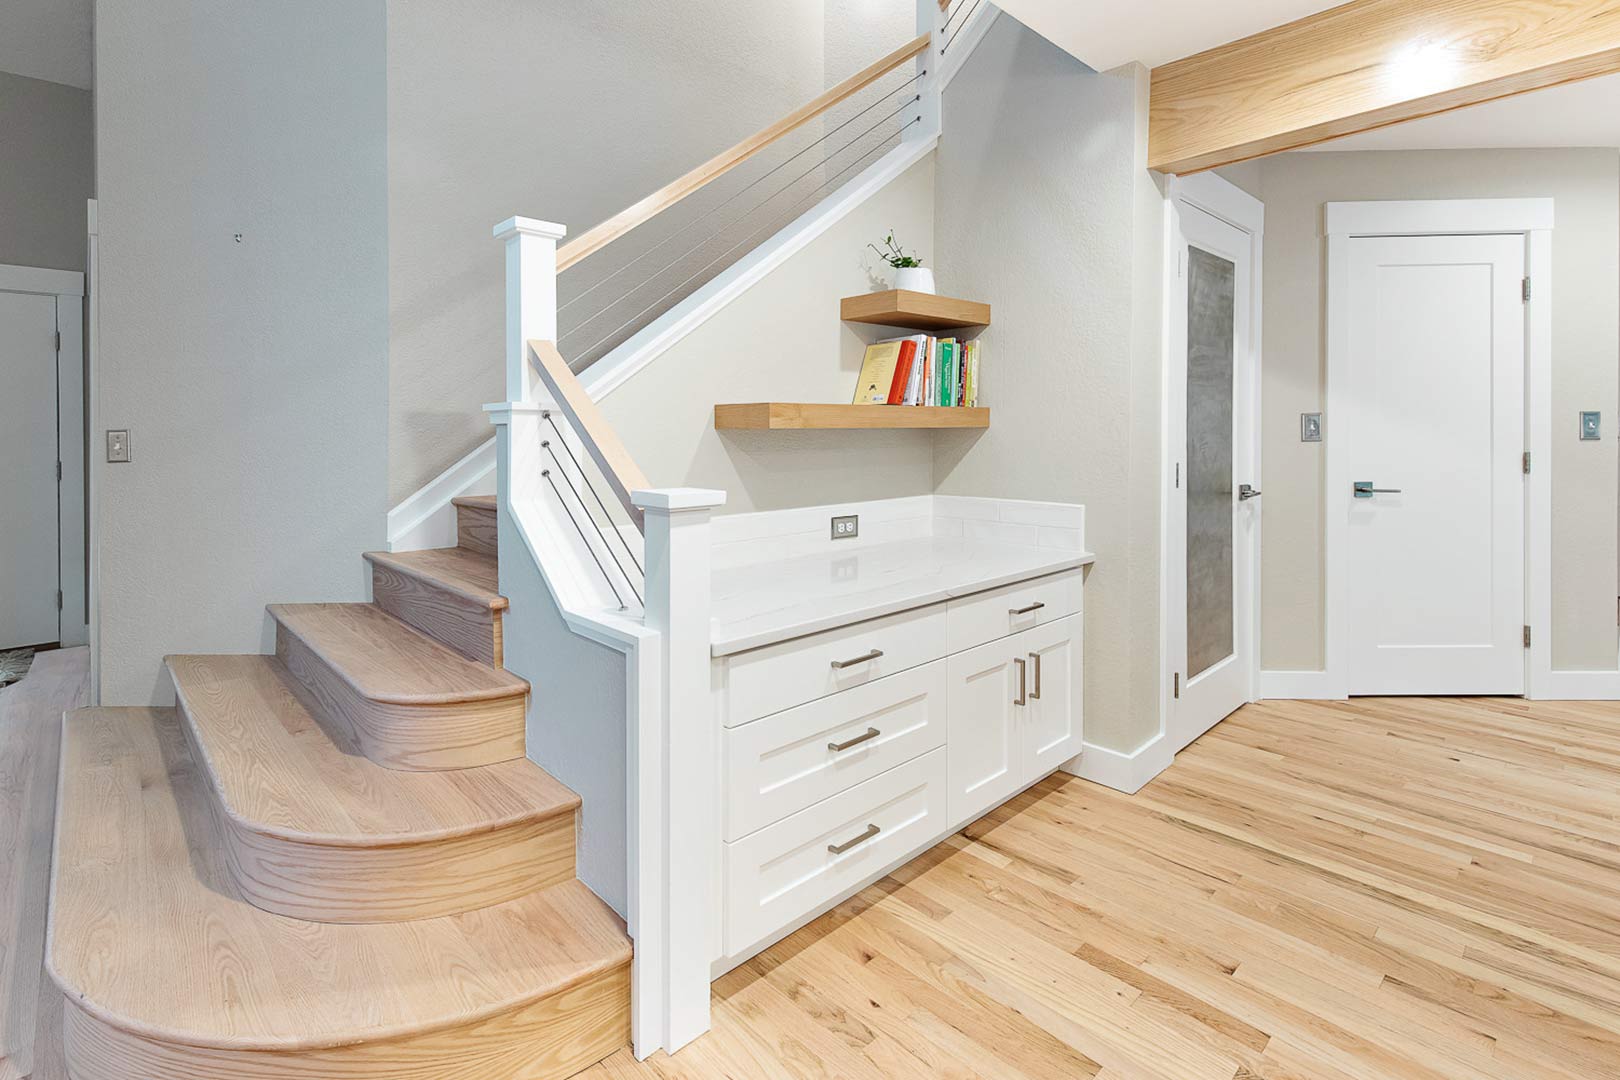 A white oak staircase with a custom built handrail made from white oak and cable matches the aesthetic of the transitional modern kitchen design